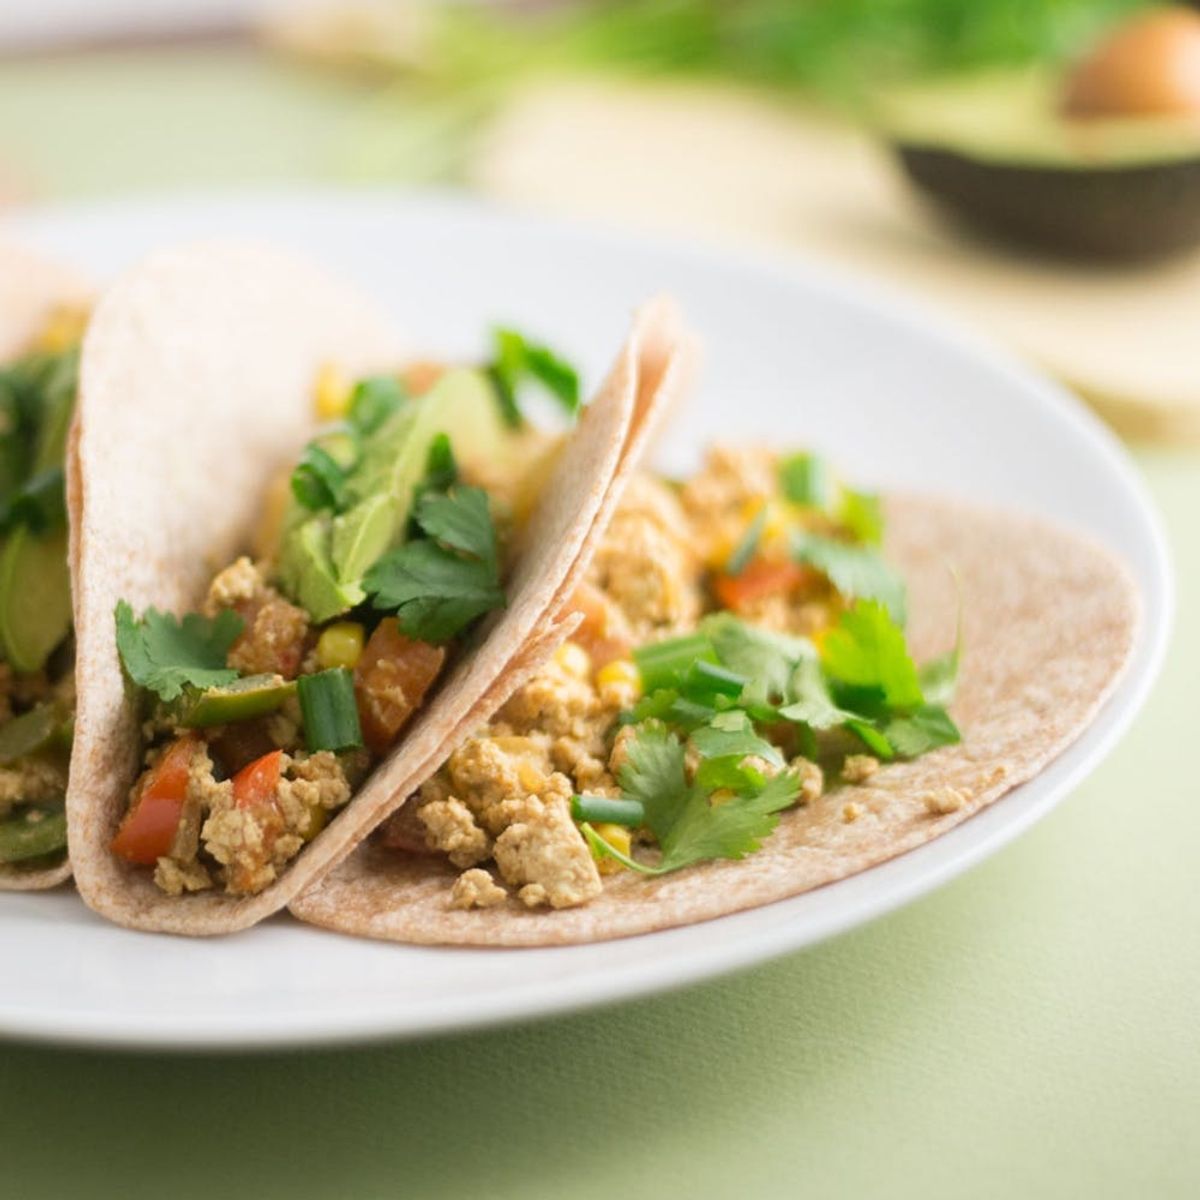 Spice Things Up With These Tofu Scramble Tacos